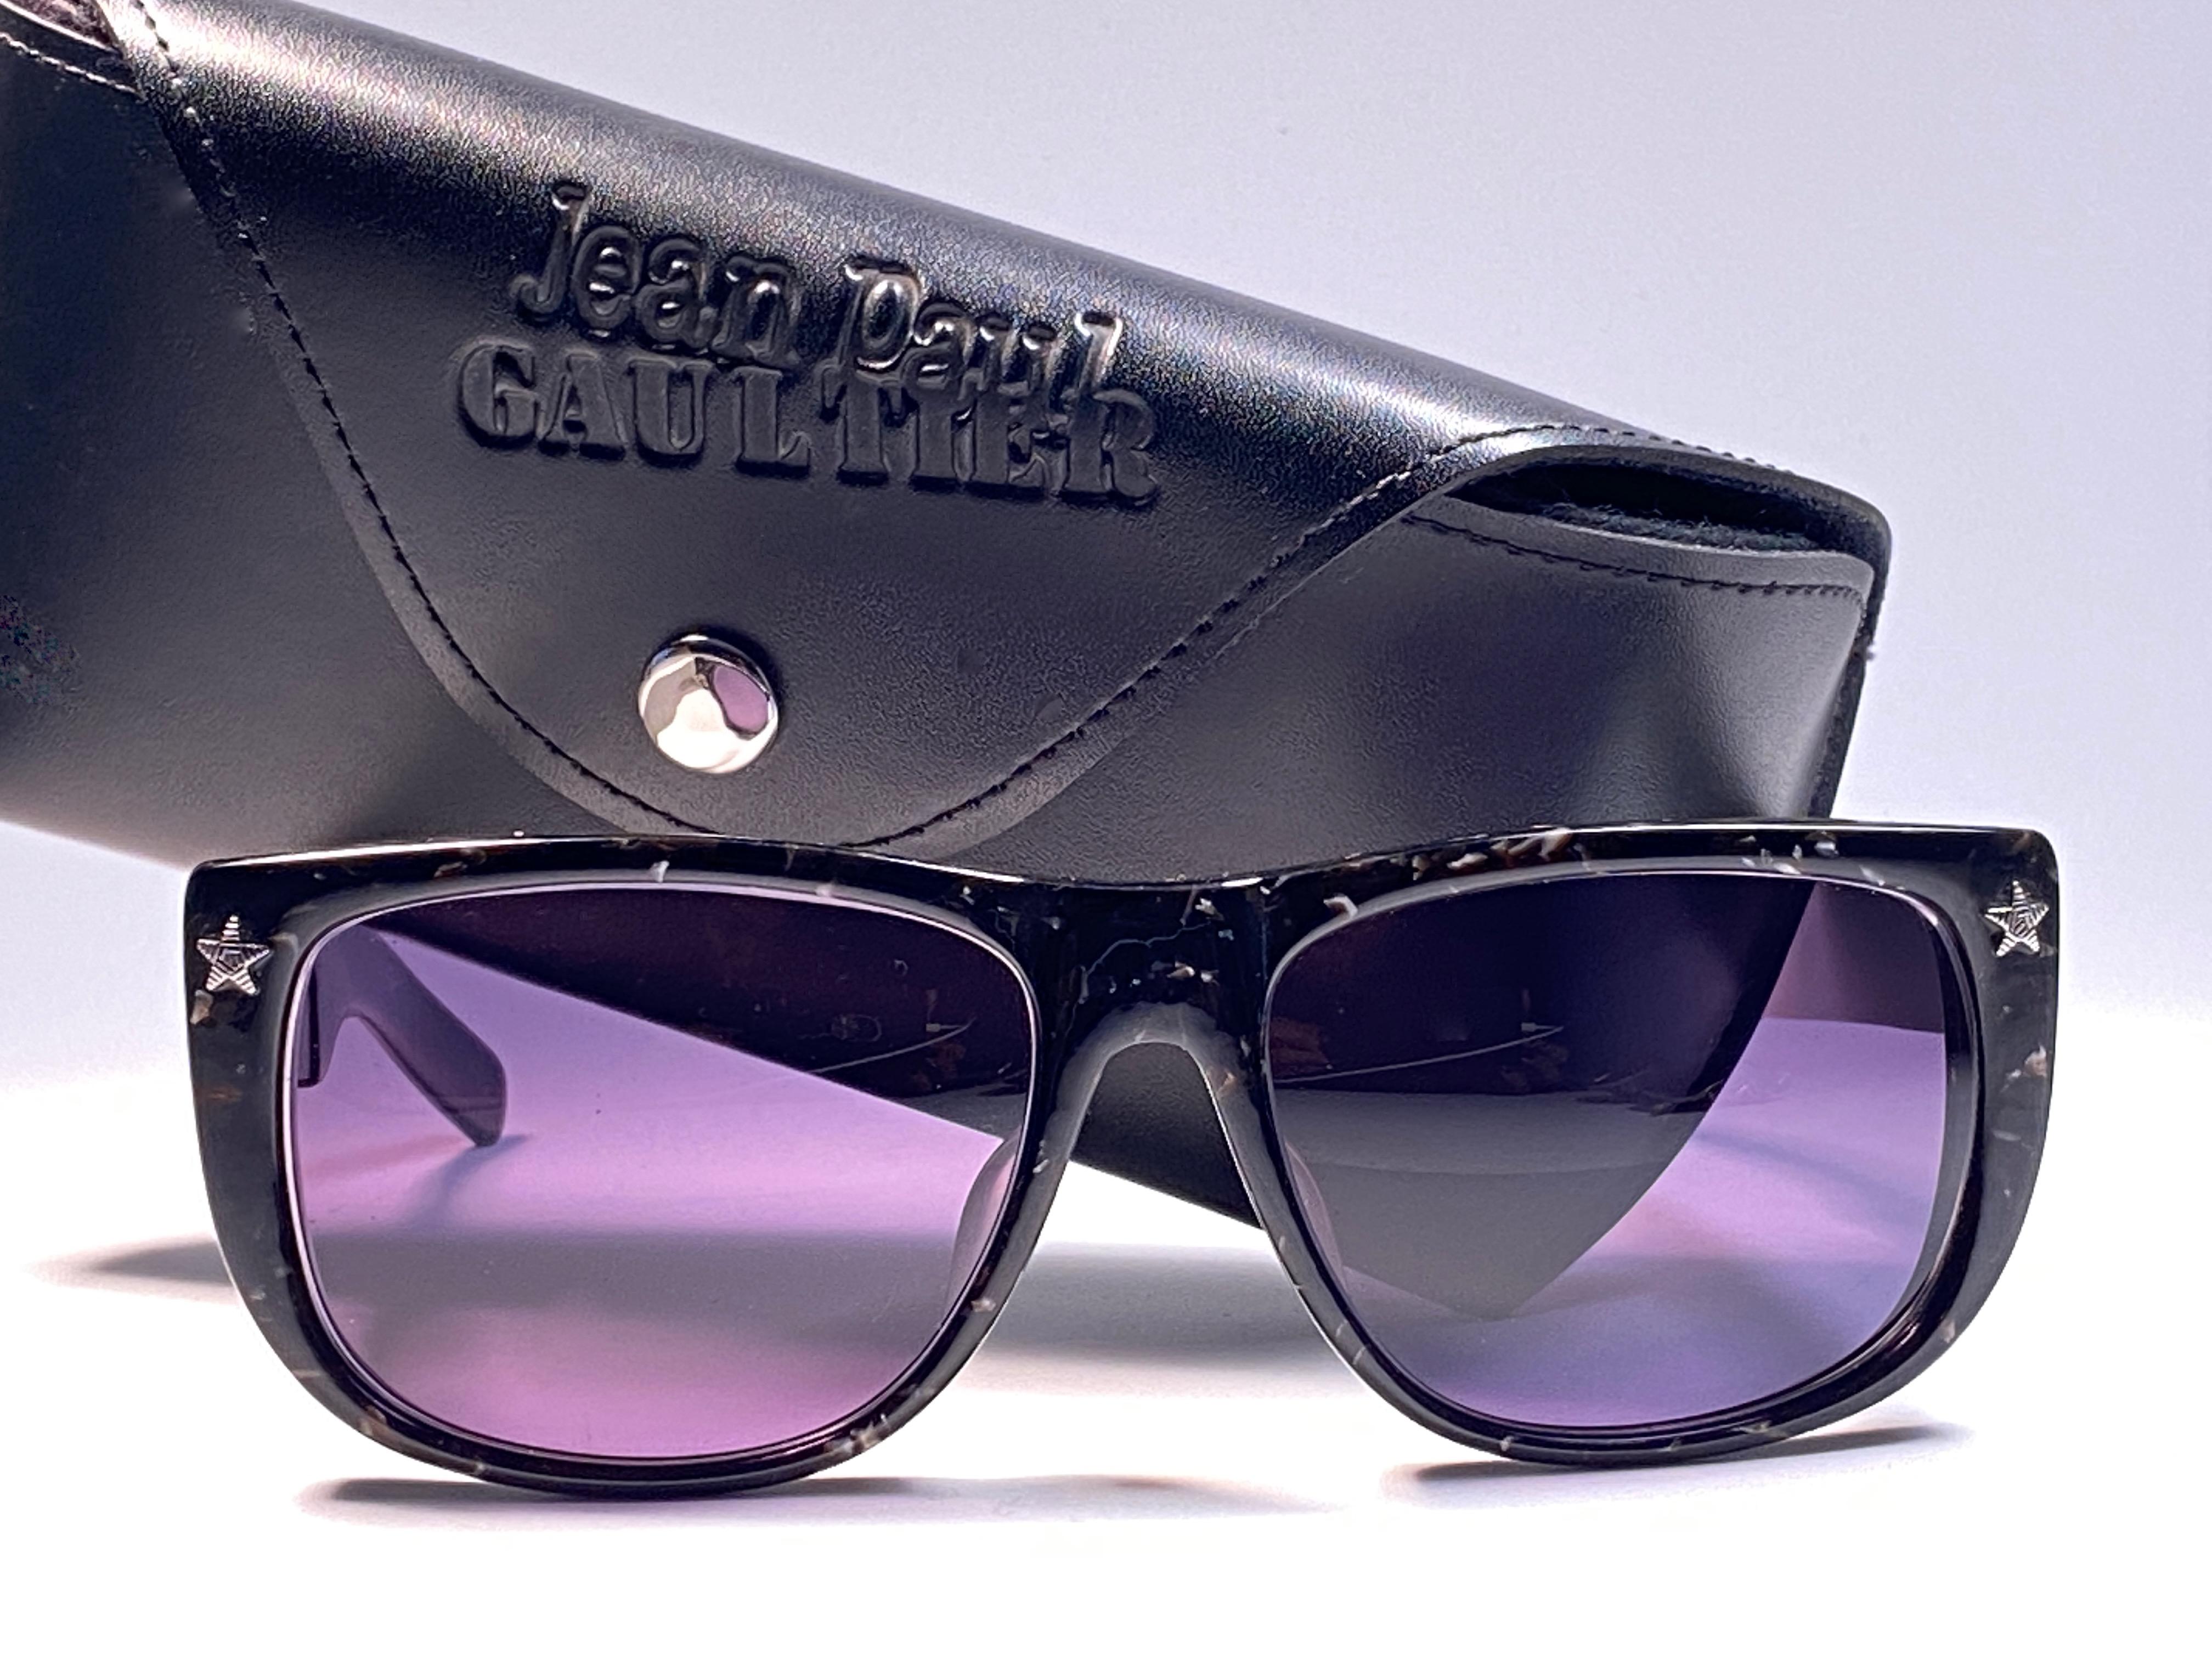 New Collectors Item!!

New Iconic Jean Paul Gaultier 56 8272 Black marbled Silver Matte temples frame. 
Dark blue lenses that complete a ready to wear JPG look.
The very same model worn by Vanilla Ice in 1990's.
Amazing design with strong yet